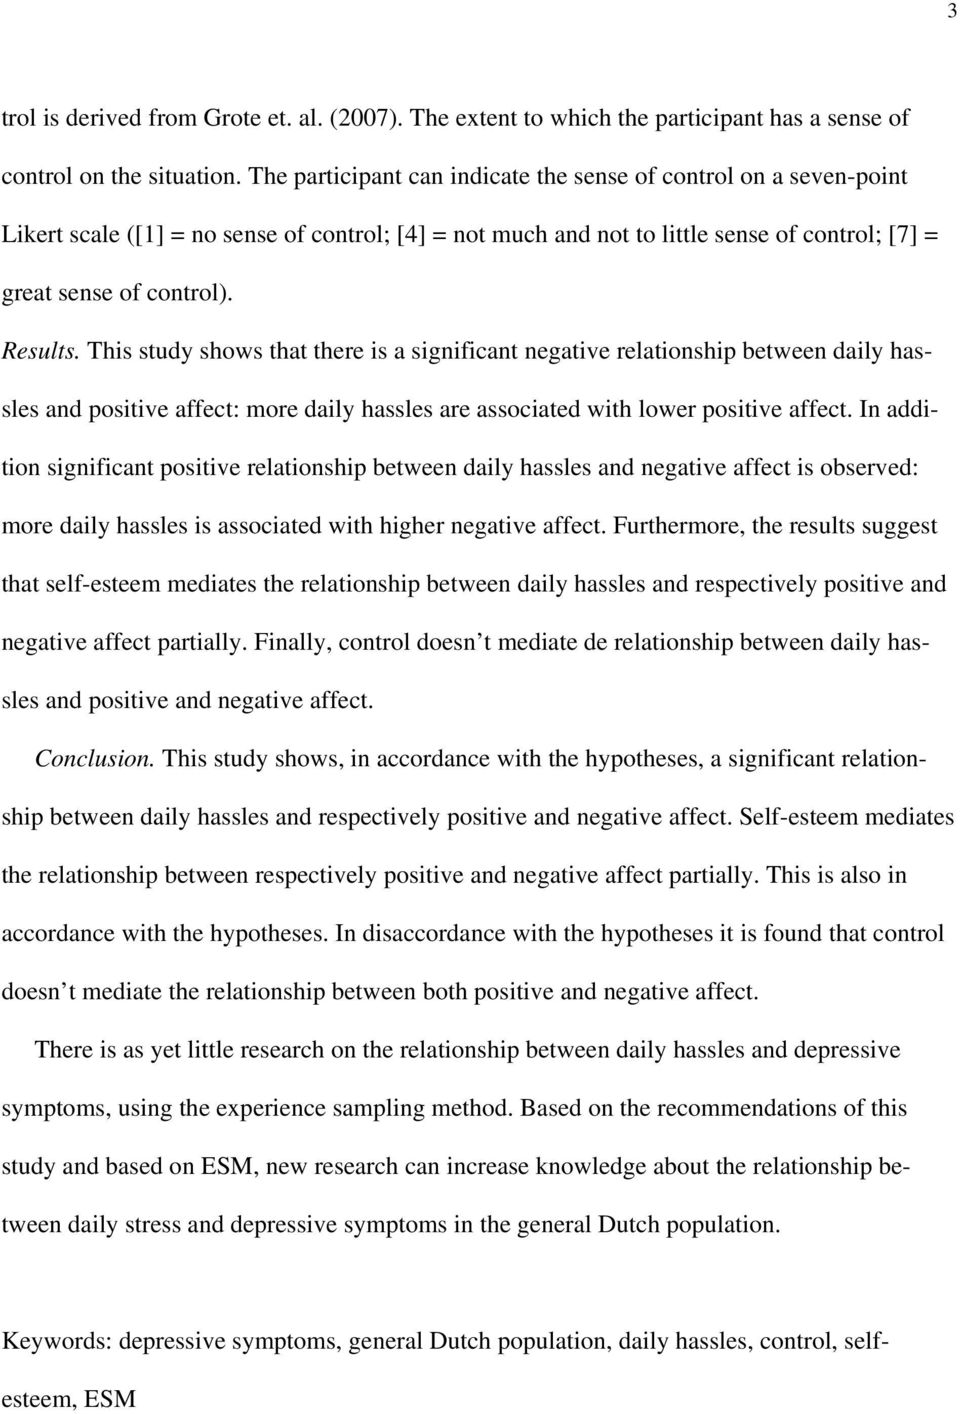 This study shows that there is a significant negative relationship between daily hassles and positive affect: more daily hassles are associated with lower positive affect.